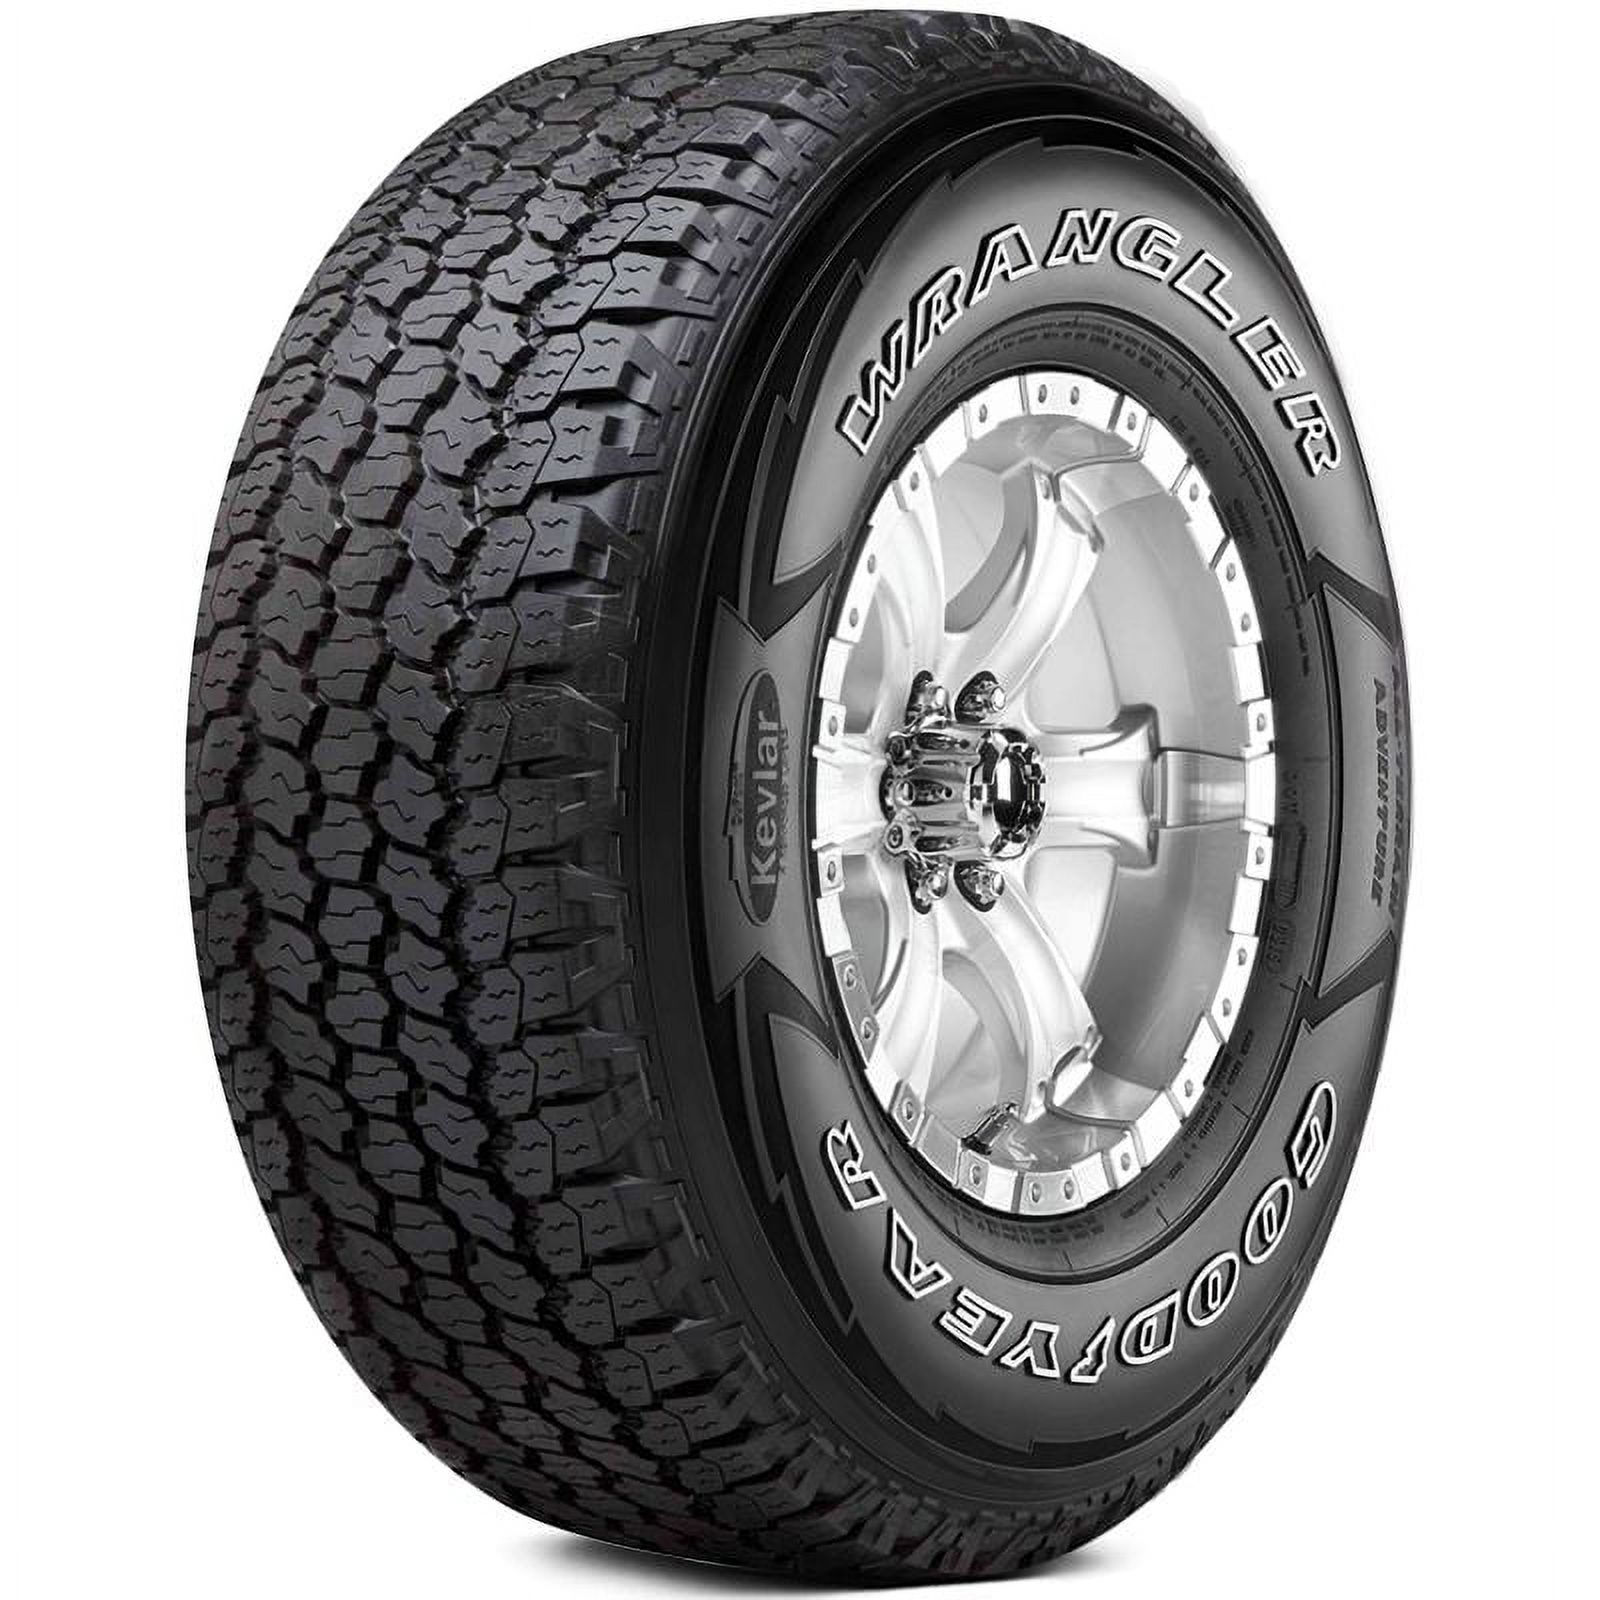 Goodyear Wrangler All-Terrain Adventure with Kevlar 265/70R16 112 T Tire - image 1 of 3